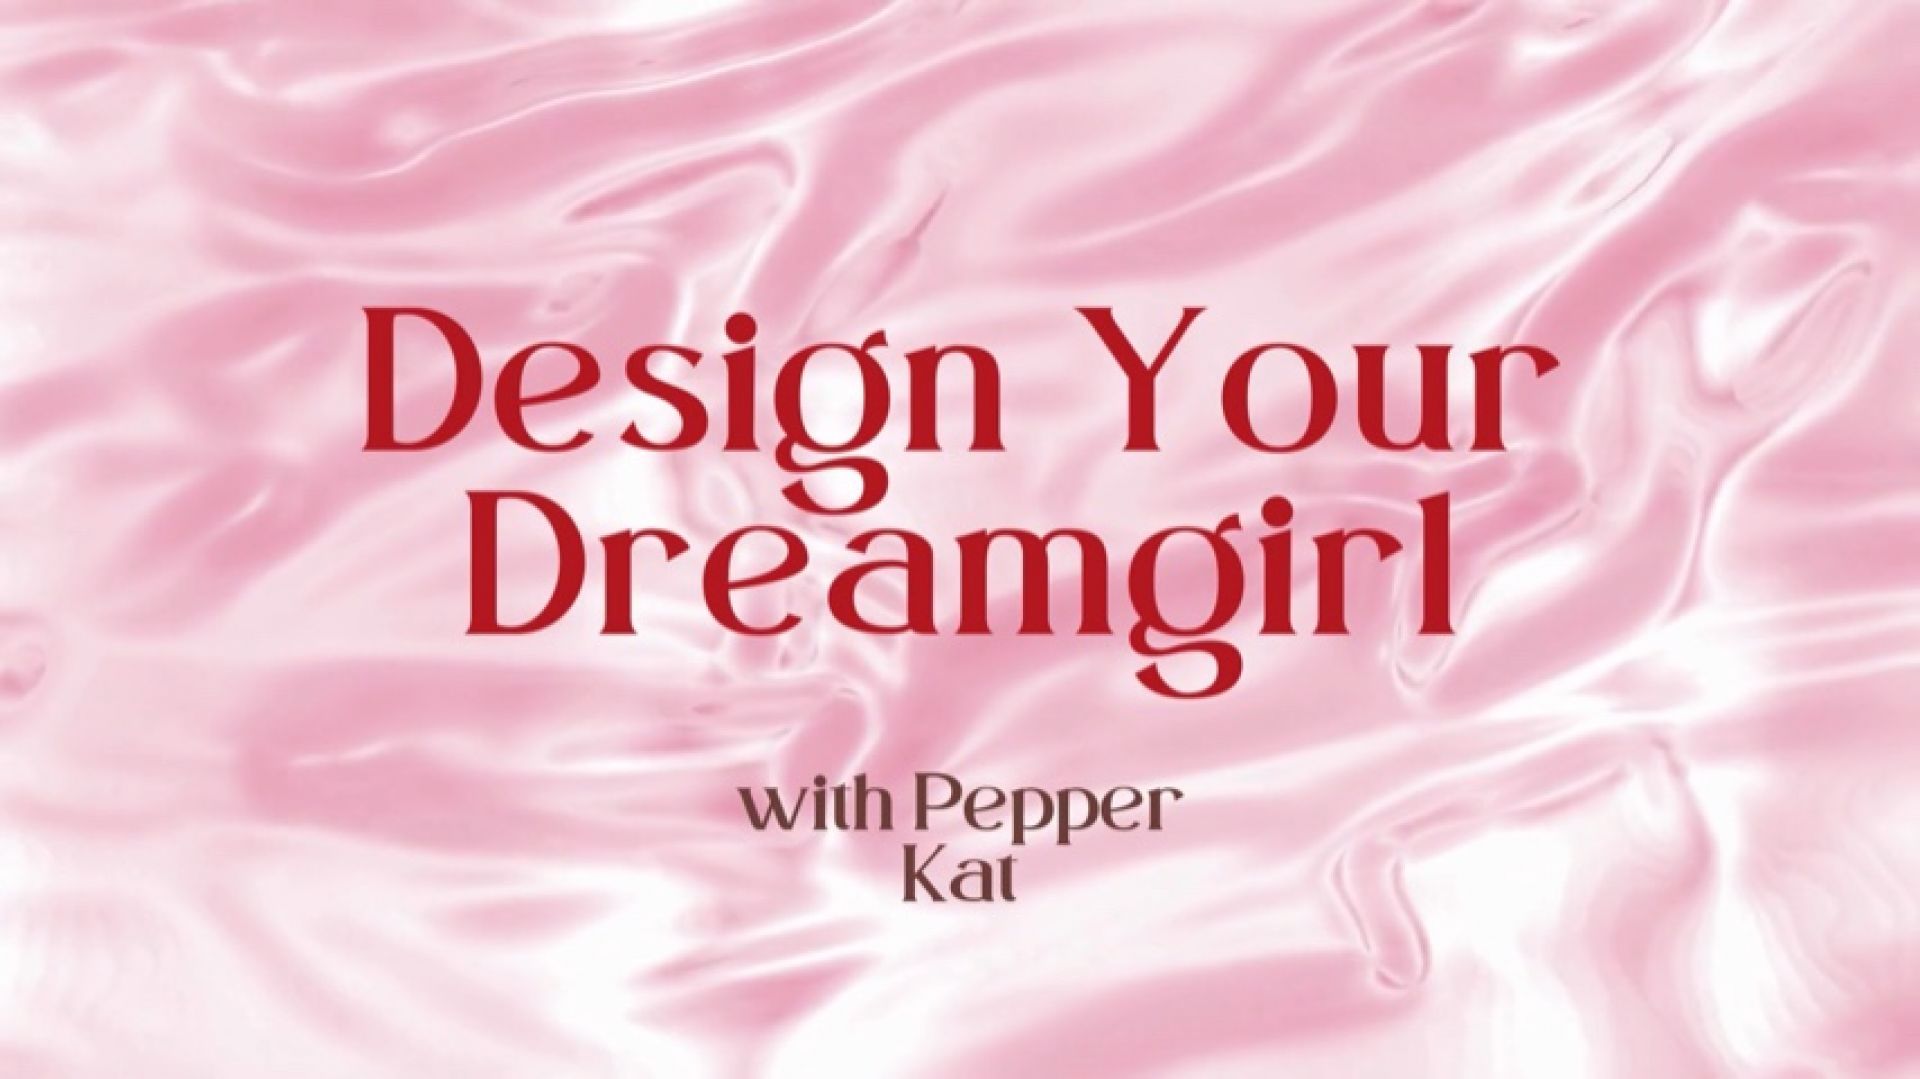 Design Your Dreamgirl Experience